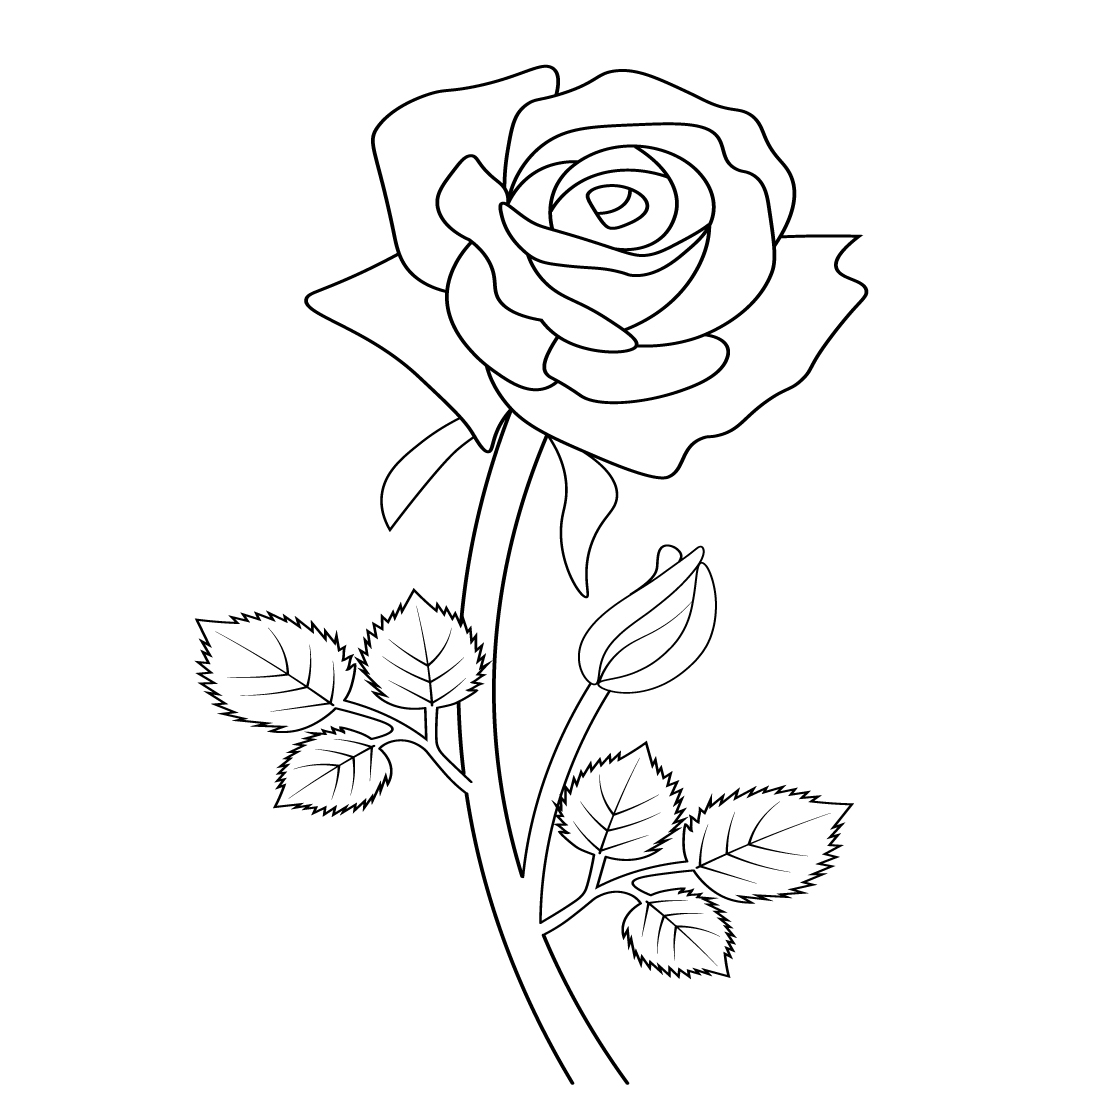 How to draw a rose: easy step-by-step rose drawing-saigonsouth.com.vn